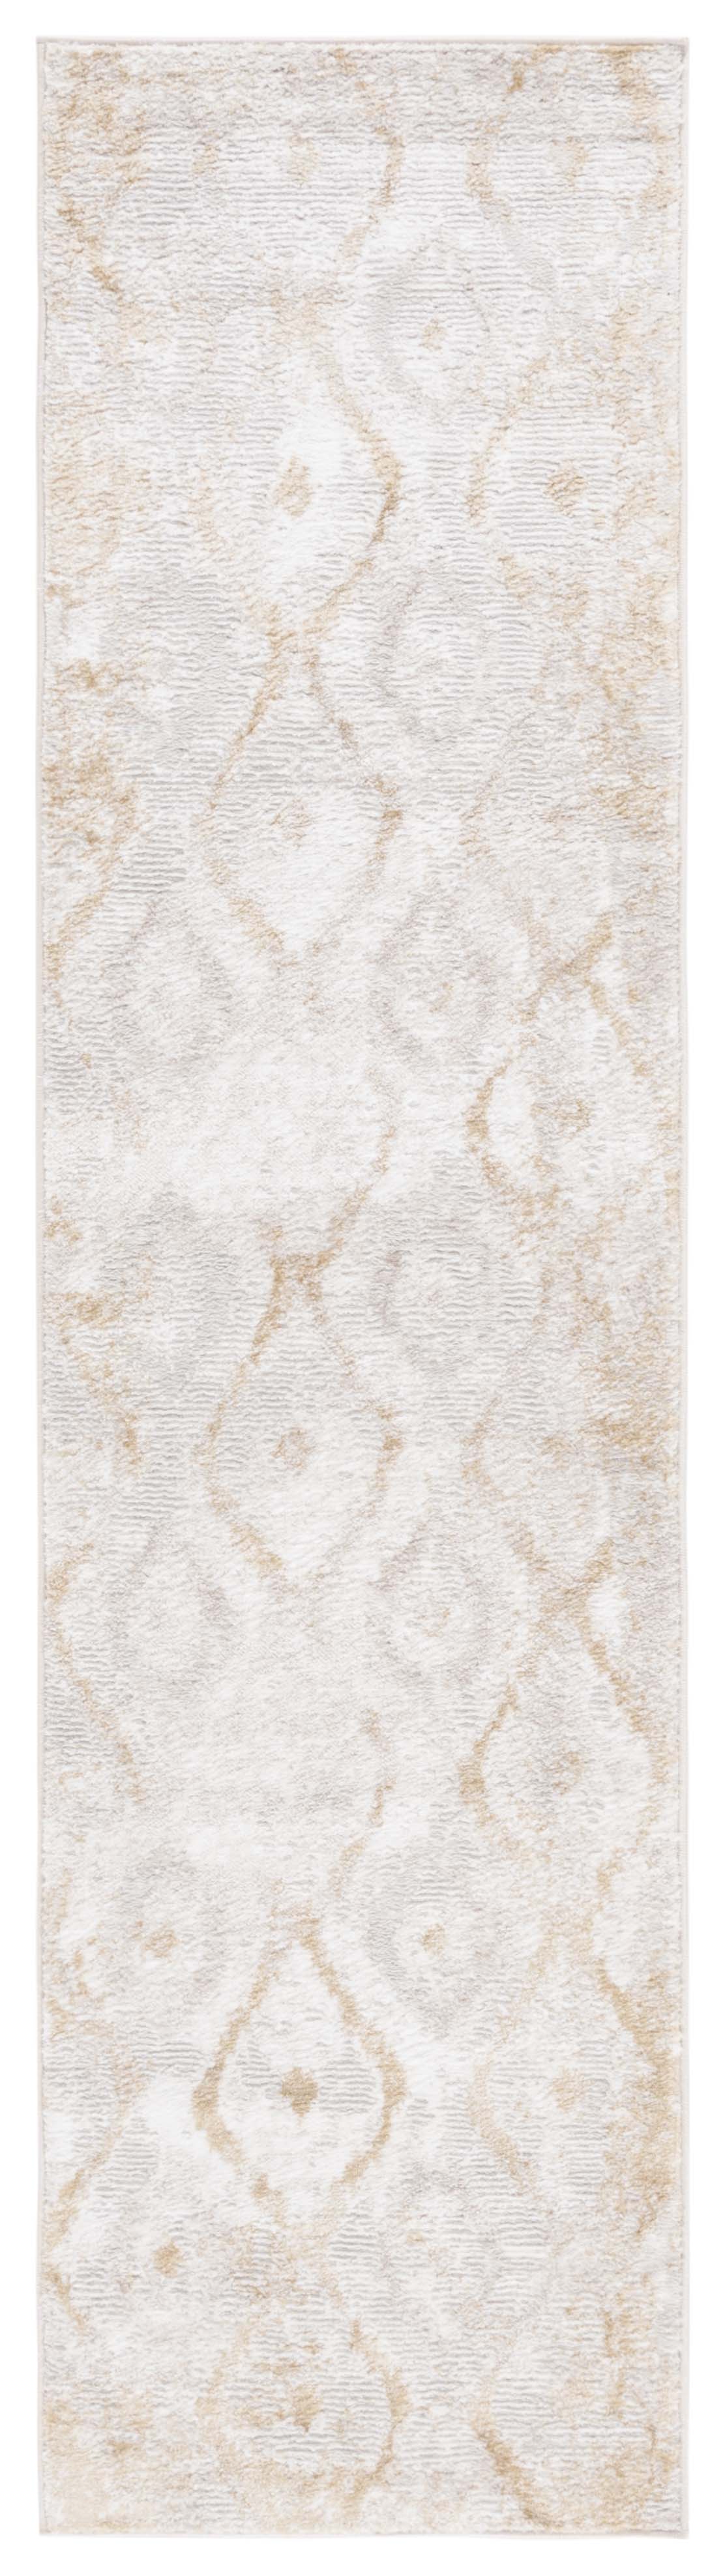 Safavieh Meadow Mdw527A Ivory/Gold Area Rug